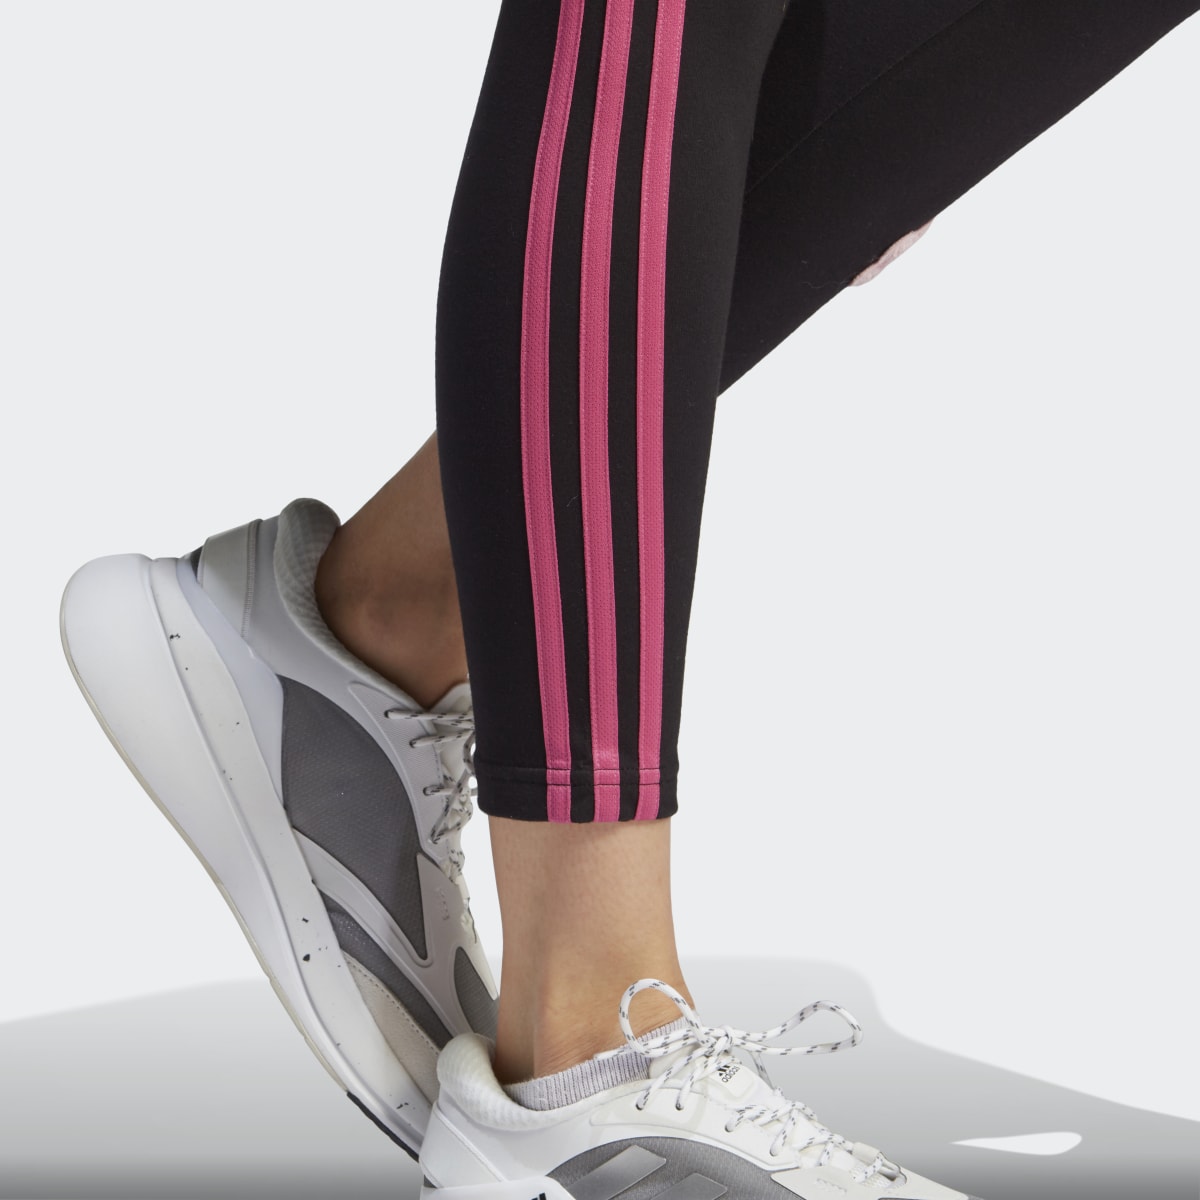 adidas 3-Stripes High-Rise Cotton Leggings With Chenille Flower